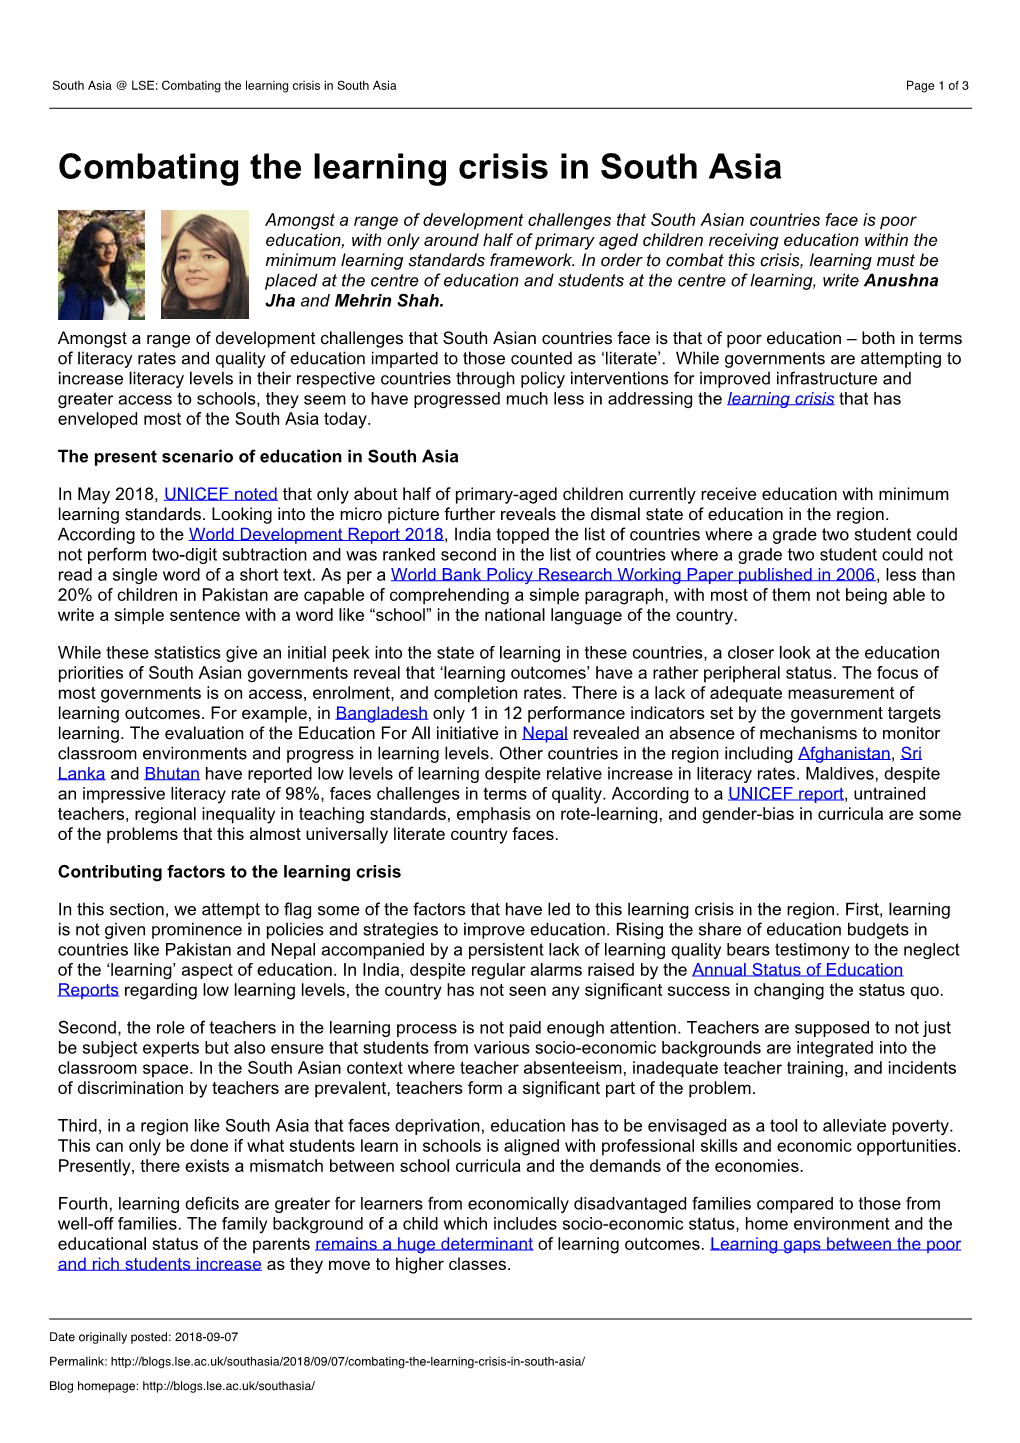 Combating the Learning Crisis in South Asia Page 1 of 3